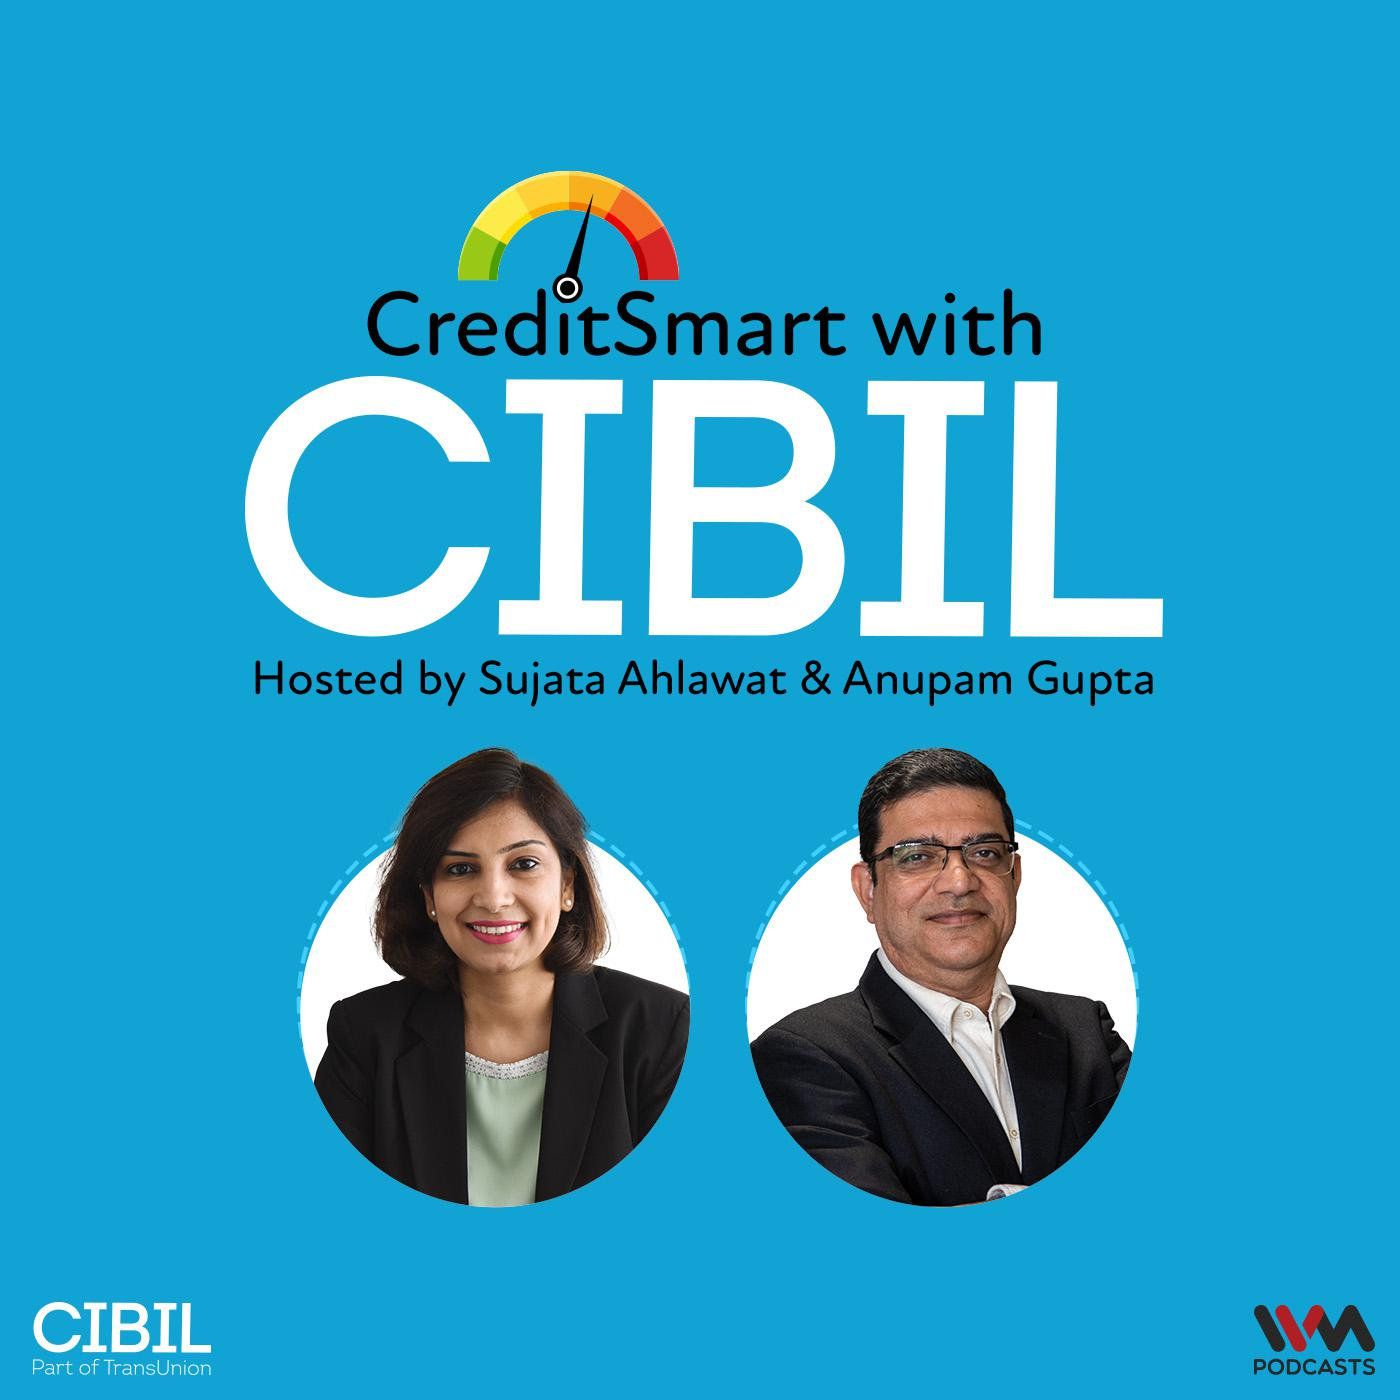 Welcome to CreditSmart with CIBIL